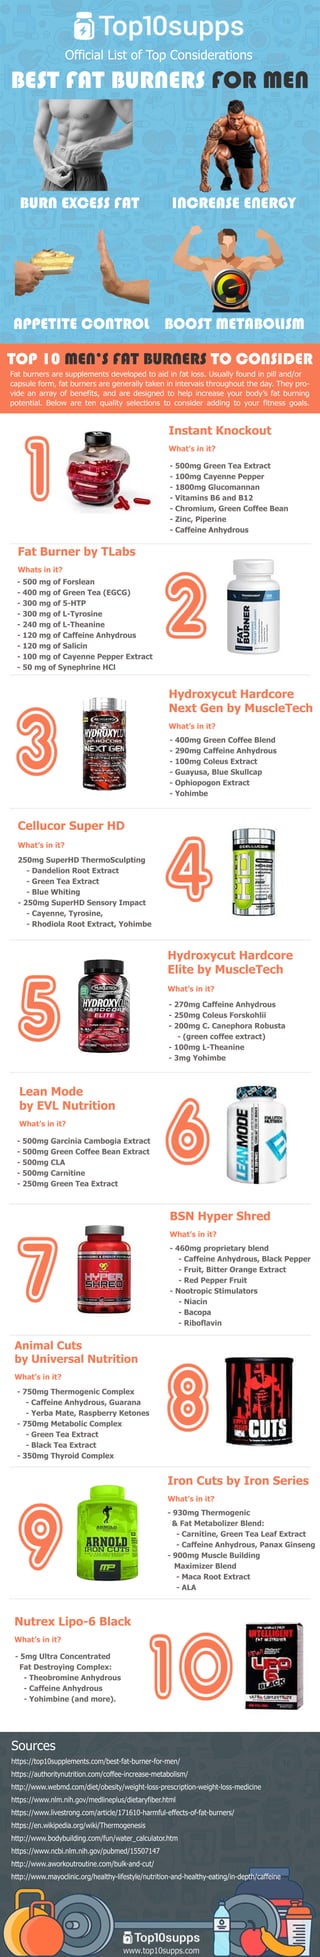 www.top10supps.com
https://top10supplements.com/best-fat-burner-for-men/
https://authoritynutrition.com/coffee-increase-metabolism/
http://www.webmd.com/diet/obesity/weight-loss-prescription-weight-loss-medicine
https://www.nlm.nih.gov/medlineplus/dietaryfiber.html
https://www.livestrong.com/article/171610-harmful-effects-of-fat-burners/
https://en.wikipedia.org/wiki/Thermogenesis
hhttp://www.bodybuilding.com/fun/water_calculator.htm
https://www.ncbi.nlm.nih.gov/pubmed/15507147
http://www.aworkoutroutine.com/bulk-and-cut/
http://www.mayoclinic.org/healthy-lifestyle/nutrition-and-healthy-eating/in-depth/caffeine
Sources
Fatburnersaresupplementsdevelopedtoaidinfatloss.Usuallyfoundinpilland/or
capsuleform,fatburnersaregenerallytakeninintervalsthroughouttheday.Theypro-
videanarrayofbenefits,andaredesignedtohelpincreaseyourbody’sfatburning
potential.Below aretenqualityselectionstoconsideraddingtoyourfitnessgoals.
TOP10MEN’SFATBURNERSTOCONSIDER
-5mgUltraConcentrated
FatDestroyingComplex:
-TheobromineAnhydrous
-CaffeineAnhydrous
-Yohimbine(andmore).
NutrexLipo-6Black
What’sinit?
-930mgThermogenic
&FatMetabolizerBlend:
-Carnitine,GreenTeaLeafExtract
-CaffeineAnhydrous,PanaxGinseng
-900mgMuscleBuilding
MaximizerBlend
-MacaRootExtract-MacaRootExtract
-ALA
IronCutsbyIronSeries
What’sinit?
-750mgThermogenicComplex
-CaffeineAnhydrous,Guarana
-YerbaMate,RaspberryKetones
-750mgMetabolicComplex
-GreenTeaExtract
-BlackTeaExtract
-350mgThyroidComplex-350mgThyroidComplex
AnimalCuts
byUniversalNutrition
What’sinit?
-460mgproprietaryblend
-CaffeineAnhydrous,BlackPepper
-Fruit,BitterOrangeExtract
-RedPepperFruit
-NootropicStimulators
-Niacin
-Bacopa-Bacopa
-Riboflavin
BSNHyperShred
What’sinit?
-500mgGarciniaCambogiaExtract
-500mgGreenCoffeeBeanExtract
-500mgCLA
-500mgCarnitine
-250mgGreenTeaExtract
LeanMode
byEVLNutrition
What’sinit?
-270mgCaffeineAnhydrous
-250mgColeusForskohlii
-200mgC.CanephoraRobusta
-(greencoffeeextract)
-100mgL-Theanine
-3mgYohimbe
HydroxycutHardcore
ElitebyMuscleTech
What’sinit?
250mgSuperHDThermoSculpting
-DandelionRootExtract
-GreenTeaExtract
-BlueWhiting
-250mgSuperHDSensoryImpact
-Cayenne,Tyrosine,
-RhodiolaRootExtract,Yohimbe-RhodiolaRootExtract,Yohimbe
CellucorSuperHD
What’sinit?
-400mgGreenCoffeeBlend
-290mgCaffeineAnhydrous
-100mgColeusExtract
-Guayusa,BlueSkullcap
-OphiopogonExtract
-Yohimbe
HydroxycutHardcore
NextGenbyMuscleTech
What’sinit?
-500mgofForslean
-400mgofGreenTea(EGCG)
-300mgof5-HTP
-300mgofL-Tyrosine
-240mgofL-Theanine
-120mgofCaffeineAnhydrous
-120mgofSalicin-120mgofSalicin
-100mgofCayennePepperExtract
-50mgofSynephrineHCl
FatBurnerbyTLabs
Whatsinit?
-500mgGreenTeaExtract
-100mgCayennePepper
-1800mgGlucomannan
-VitaminsB6andB12
-Chromium,GreenCoffeeBean
-Zinc,Piperine
-CaffeineAnhydrous-CaffeineAnhydrous
InstantKnockout
What’sinit?
BURNEXCESSFAT INCREASEENERGY
BOOSTMETABOLISMAPPETITECONTROL
BESTFATBURNERSFORMEN
OfficialListofTopConsiderations
 